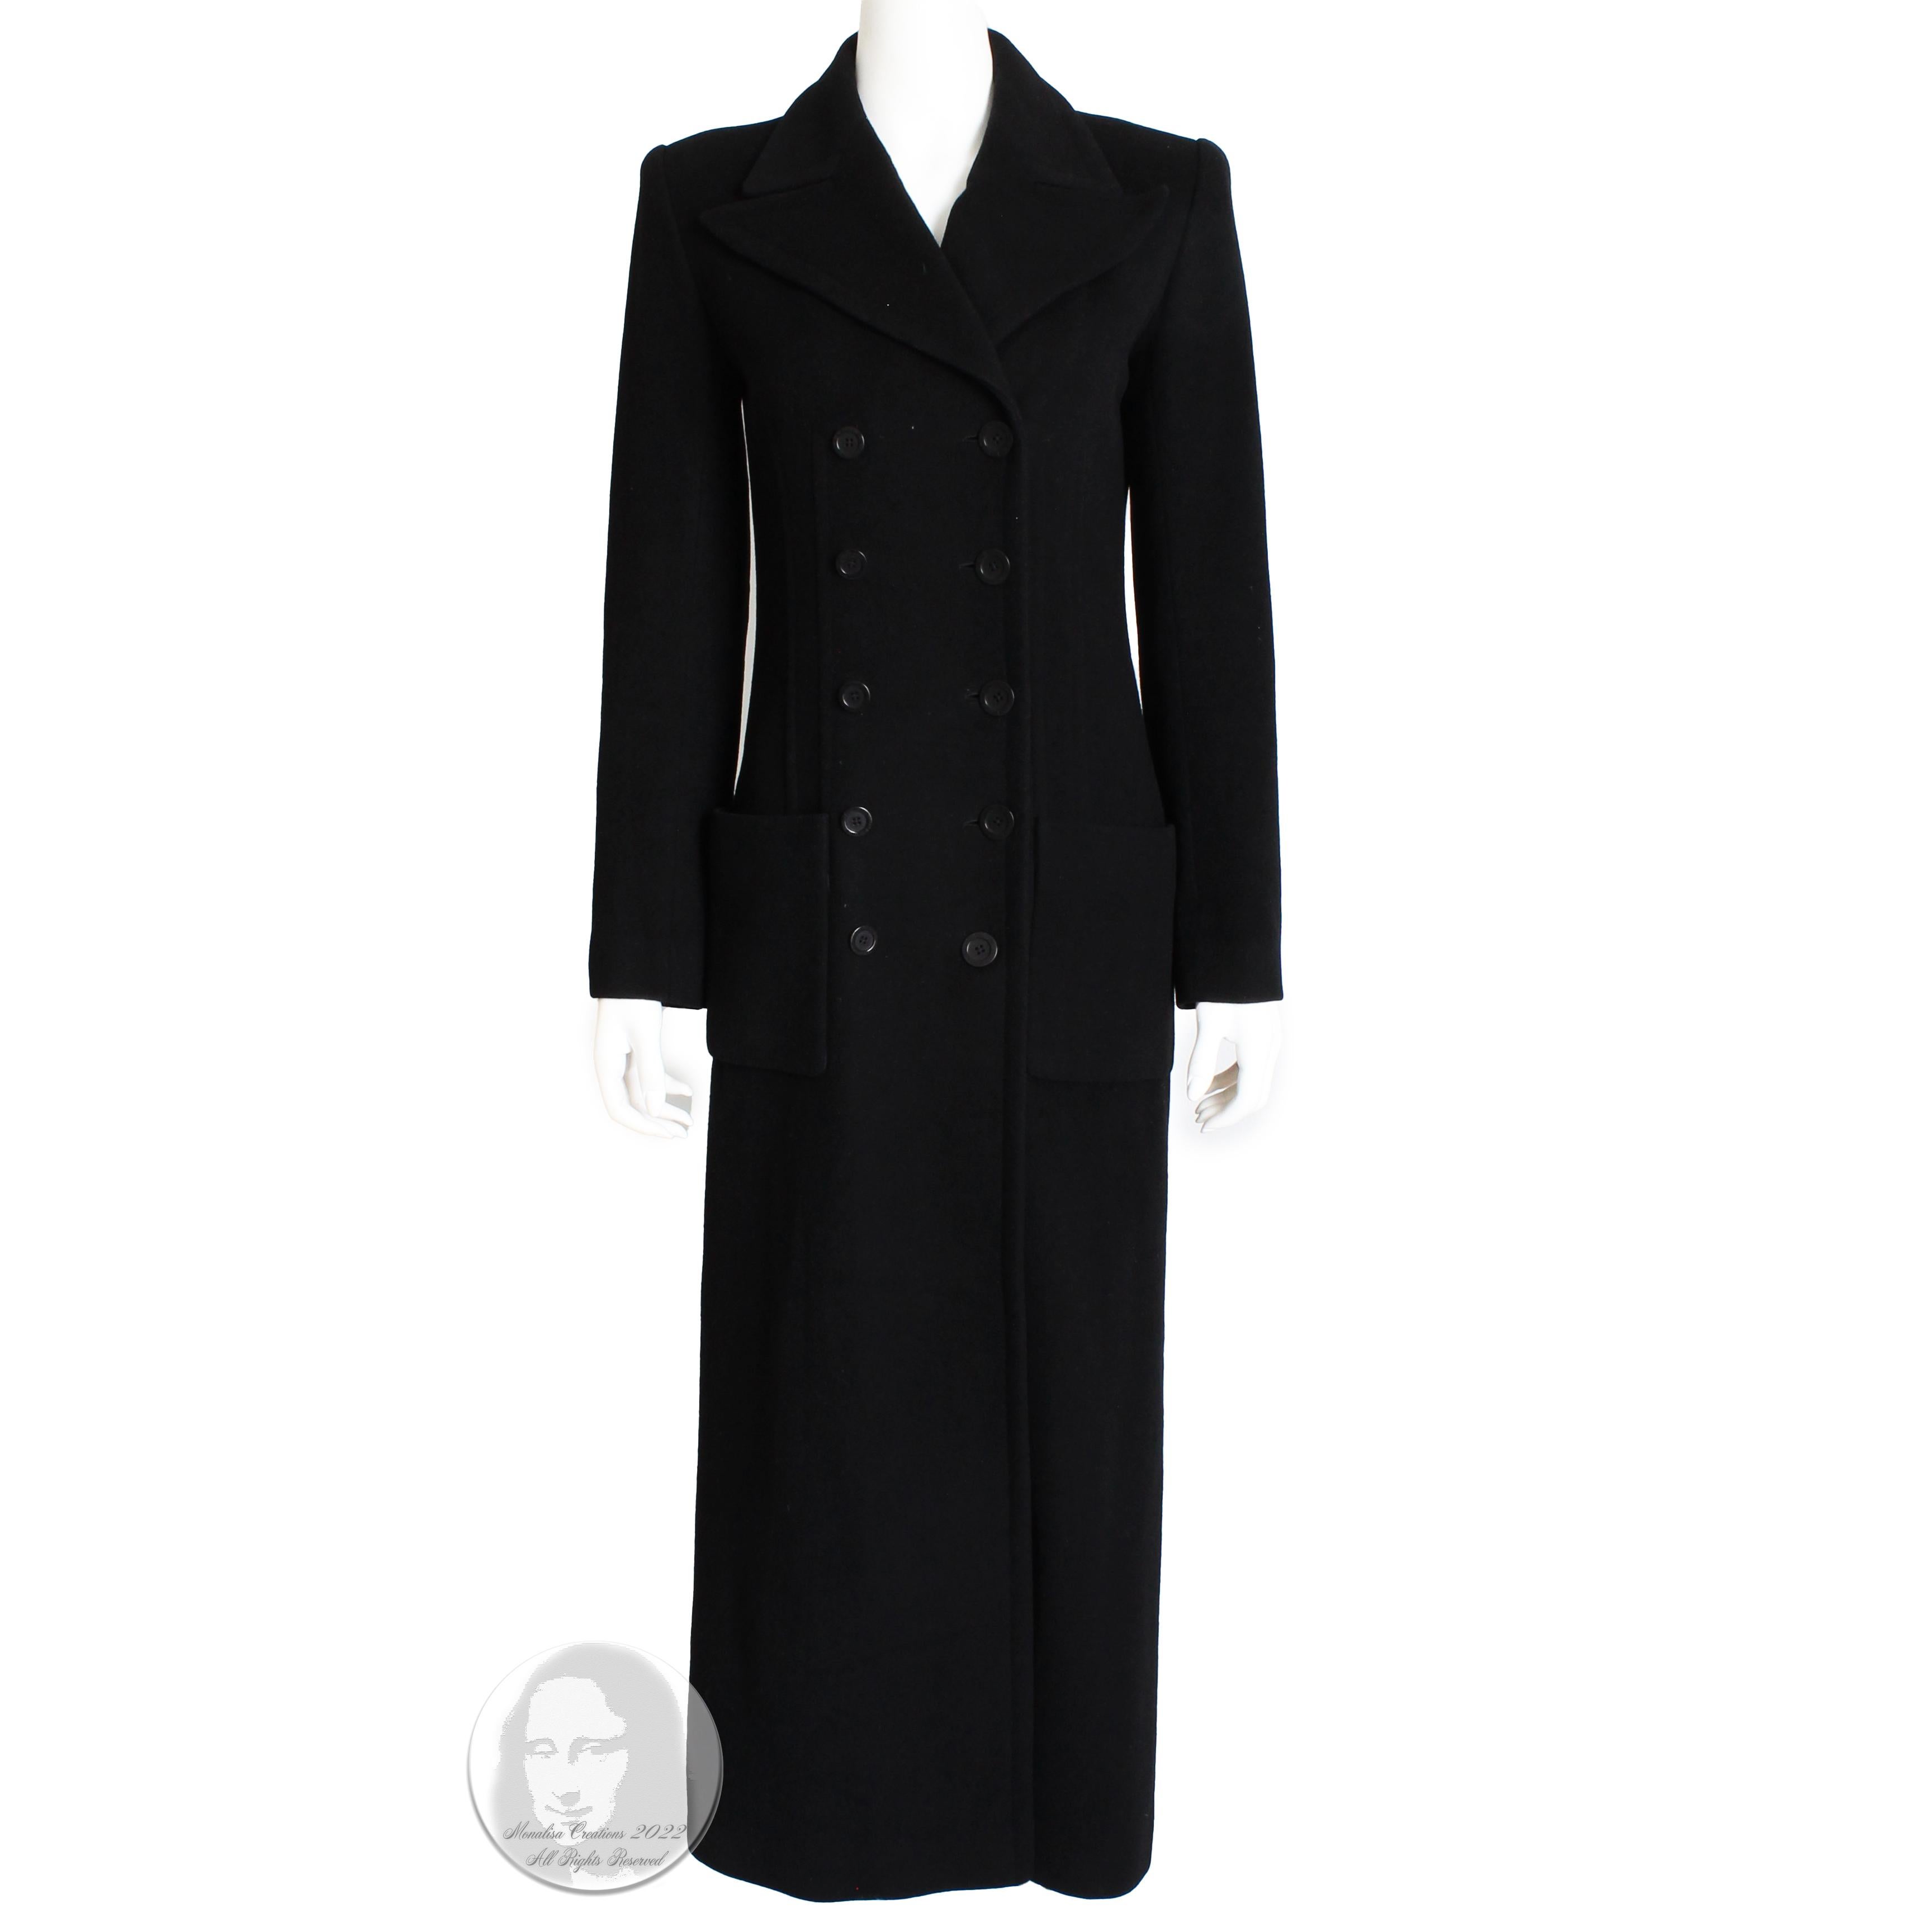 This classic long coat was made by Sonia Rykiel, most likely in the late 1990s.  Made from black supple cashmere, it features double-breasted construction and is fully-lined in gray pin-striped fabric.  

A timeless classic, the cashmere is